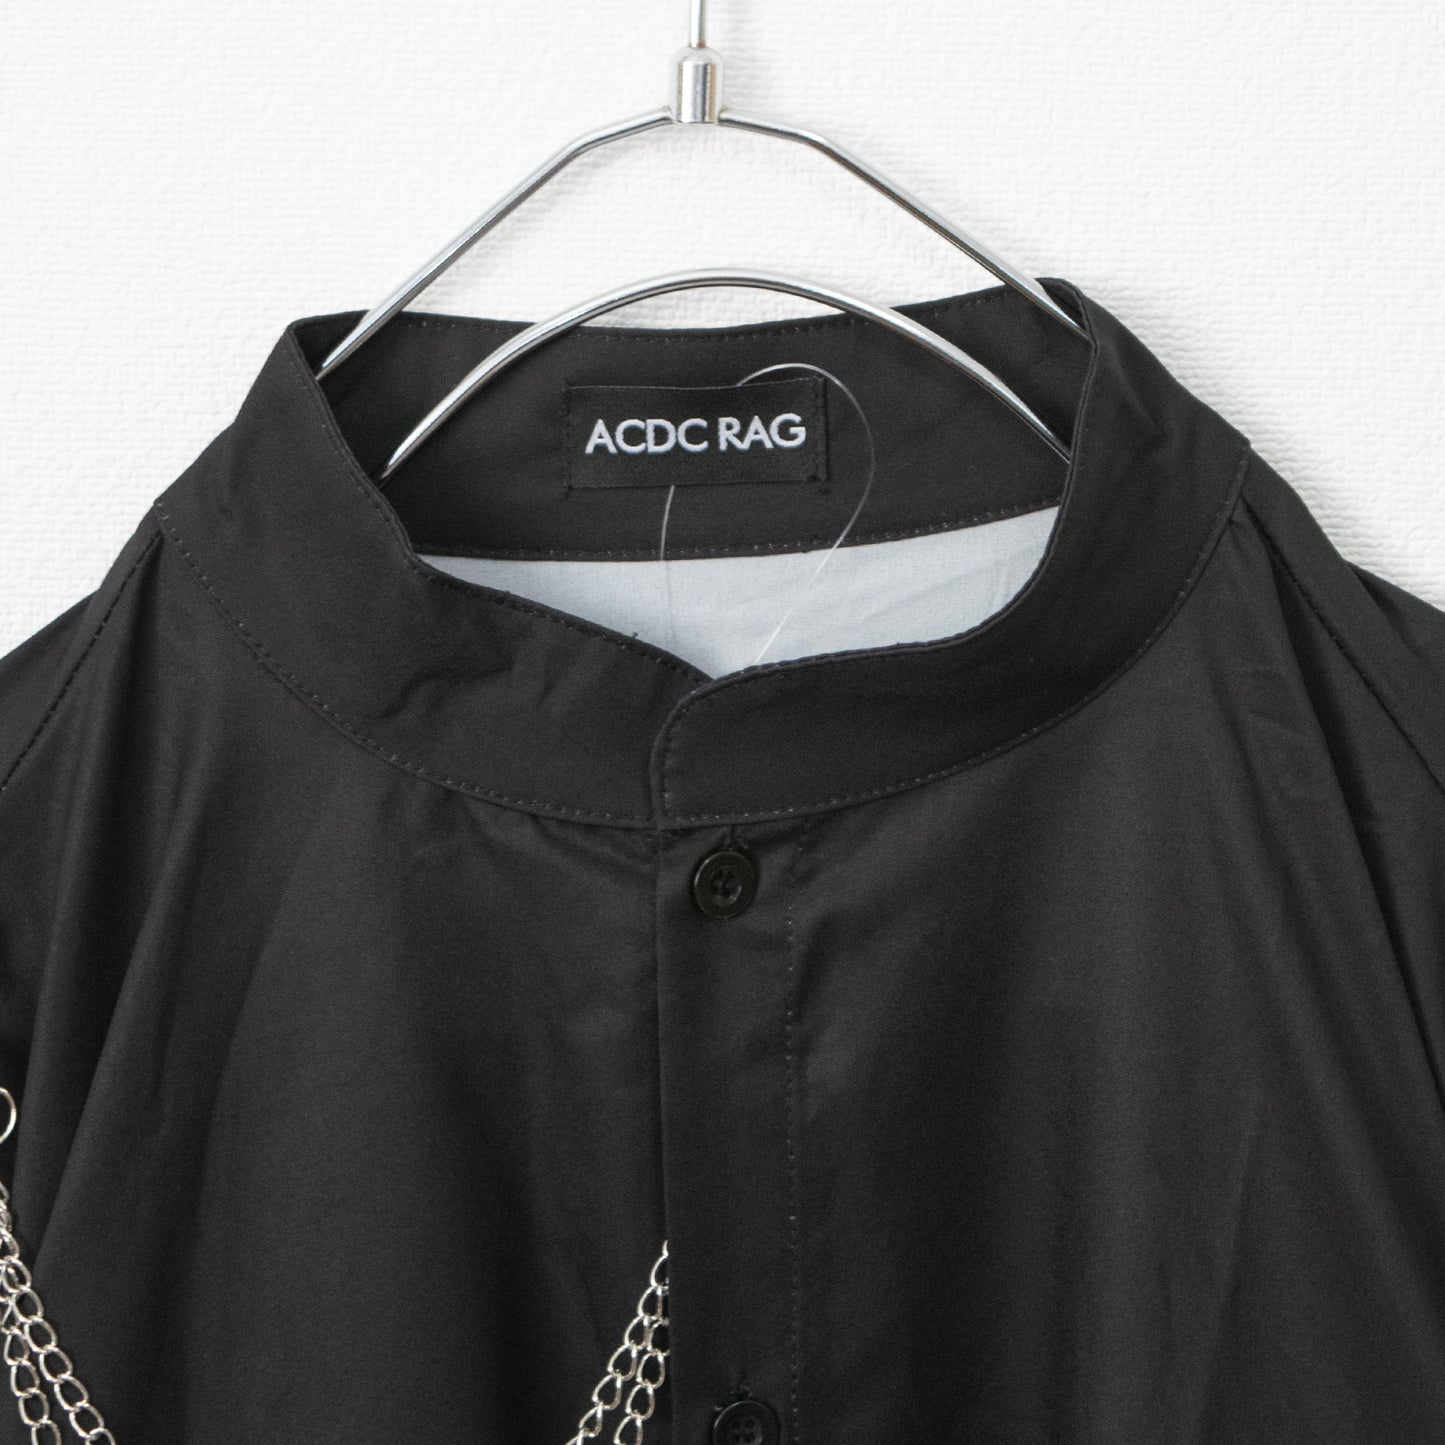 ACDC RAG and Water Sleeve Sailor Top GRAY Gray - YOUAREMYPOISON